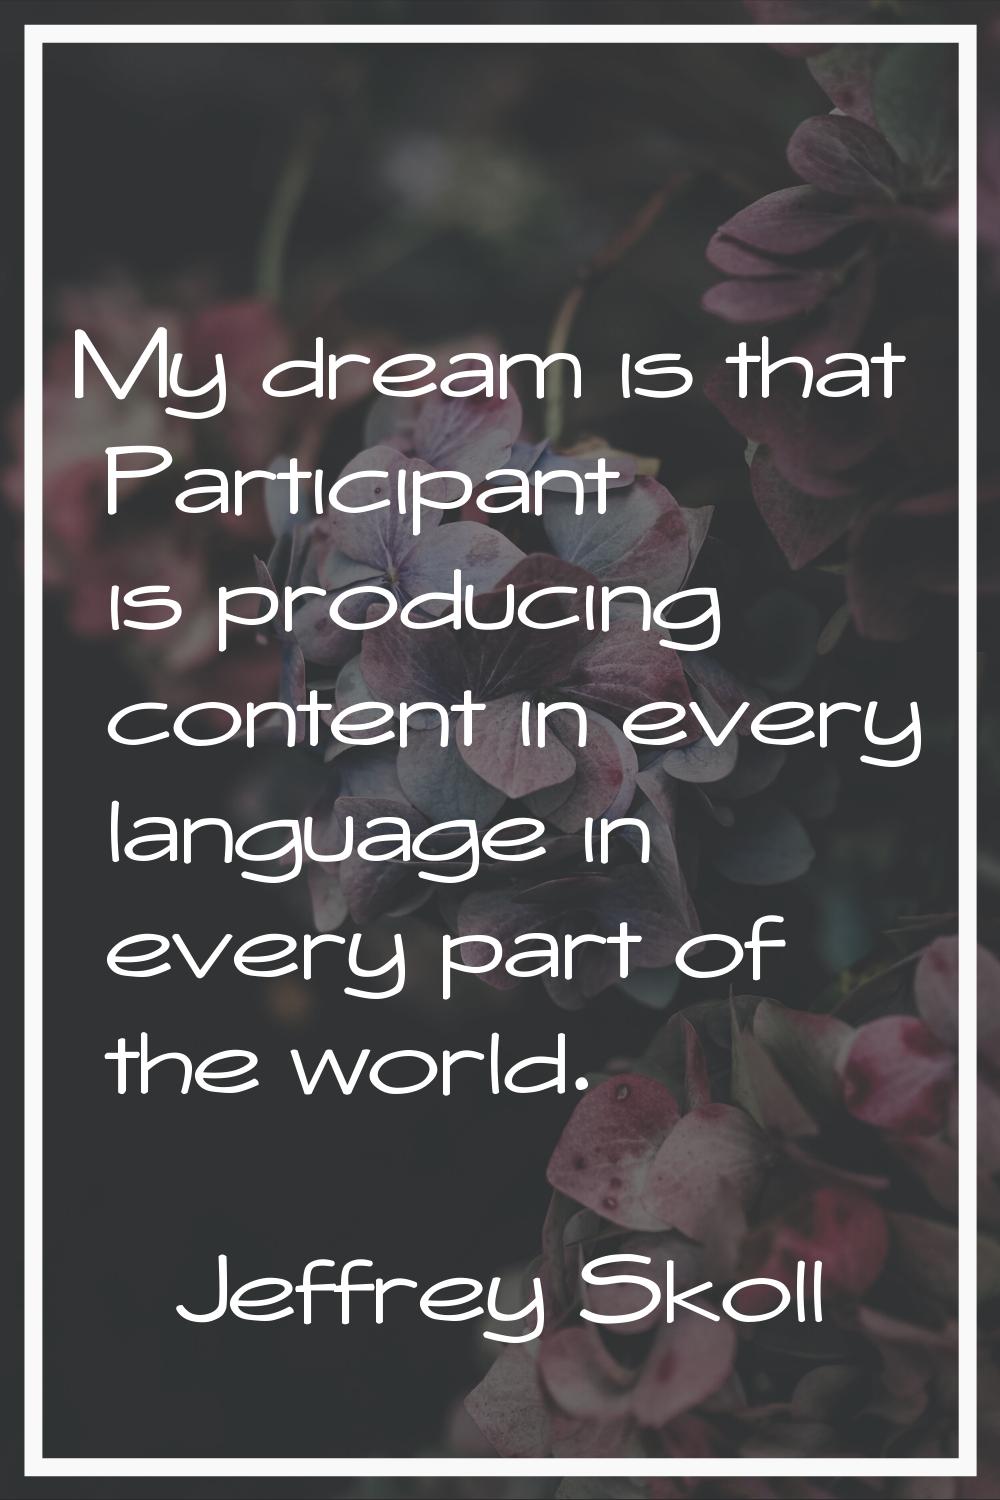 My dream is that Participant is producing content in every language in every part of the world.